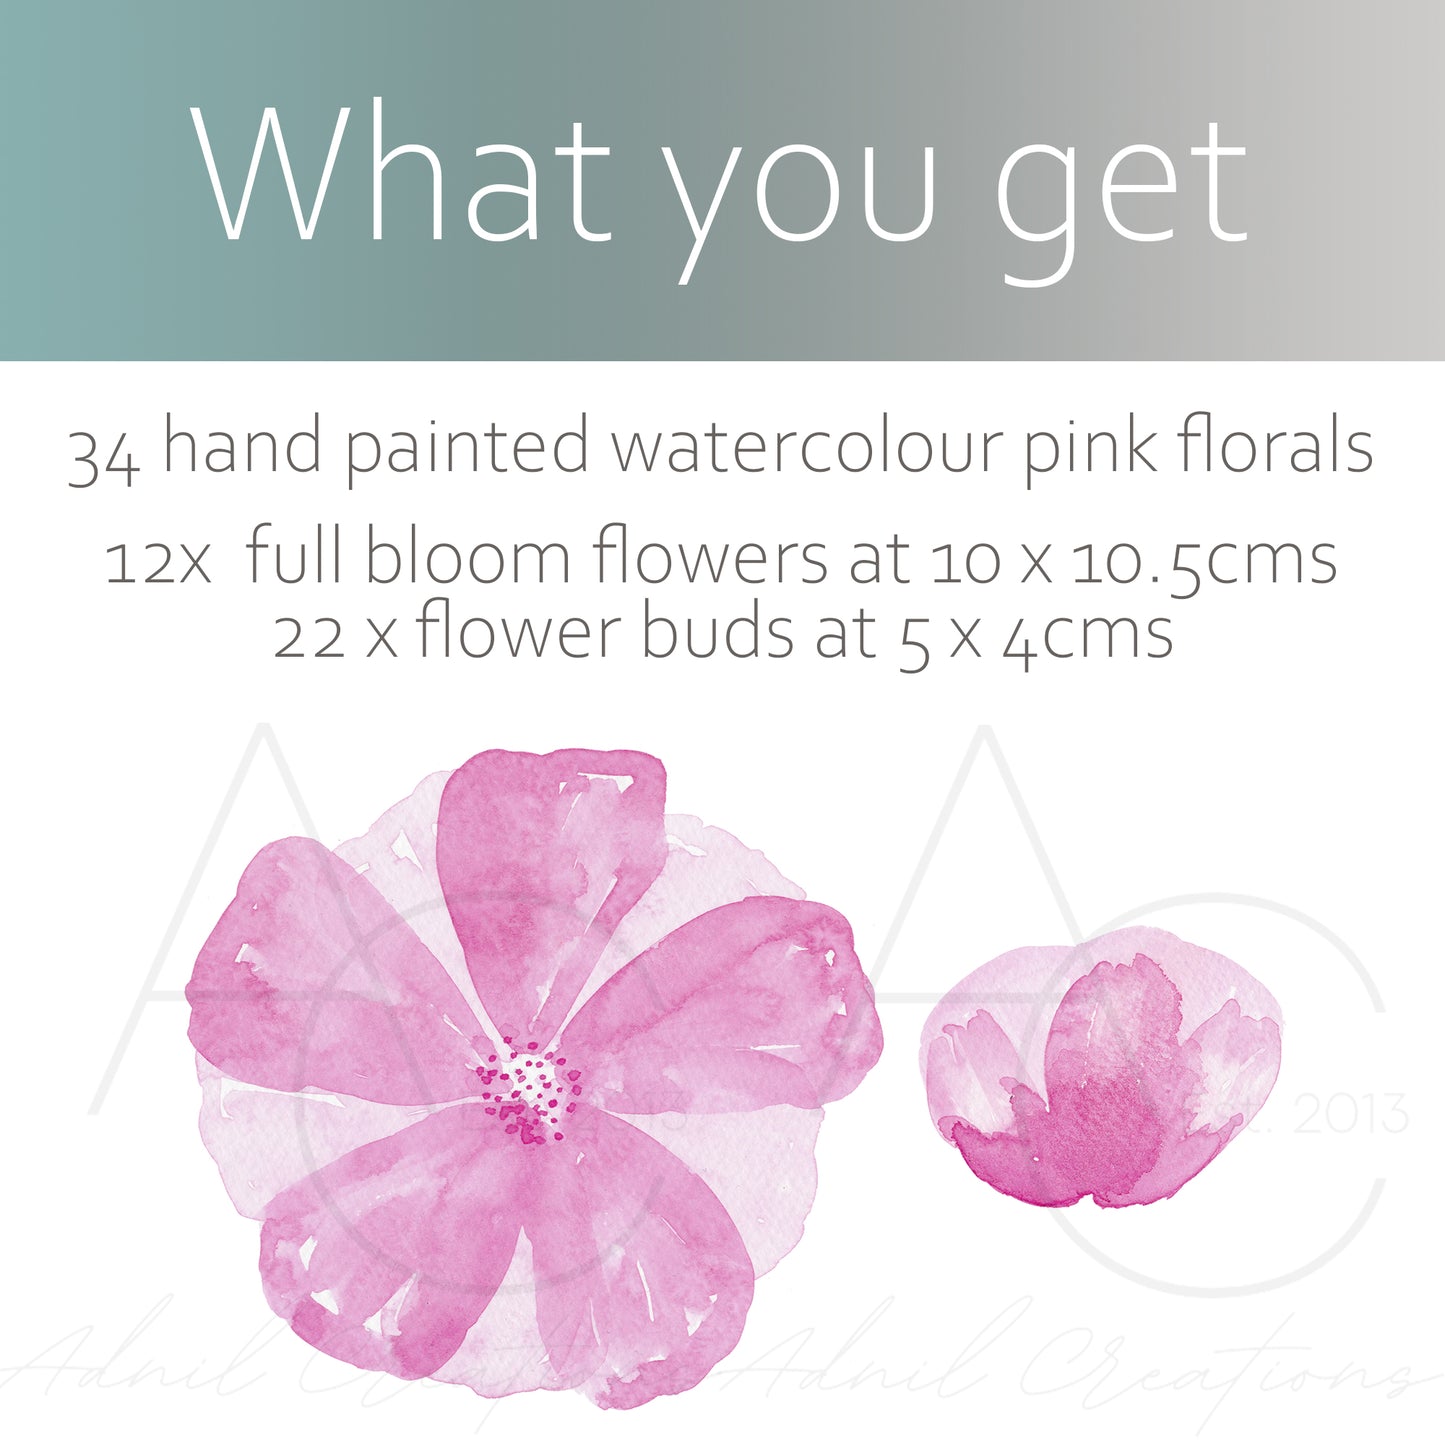 Watercolour pink flowers | Fabric wall stickers